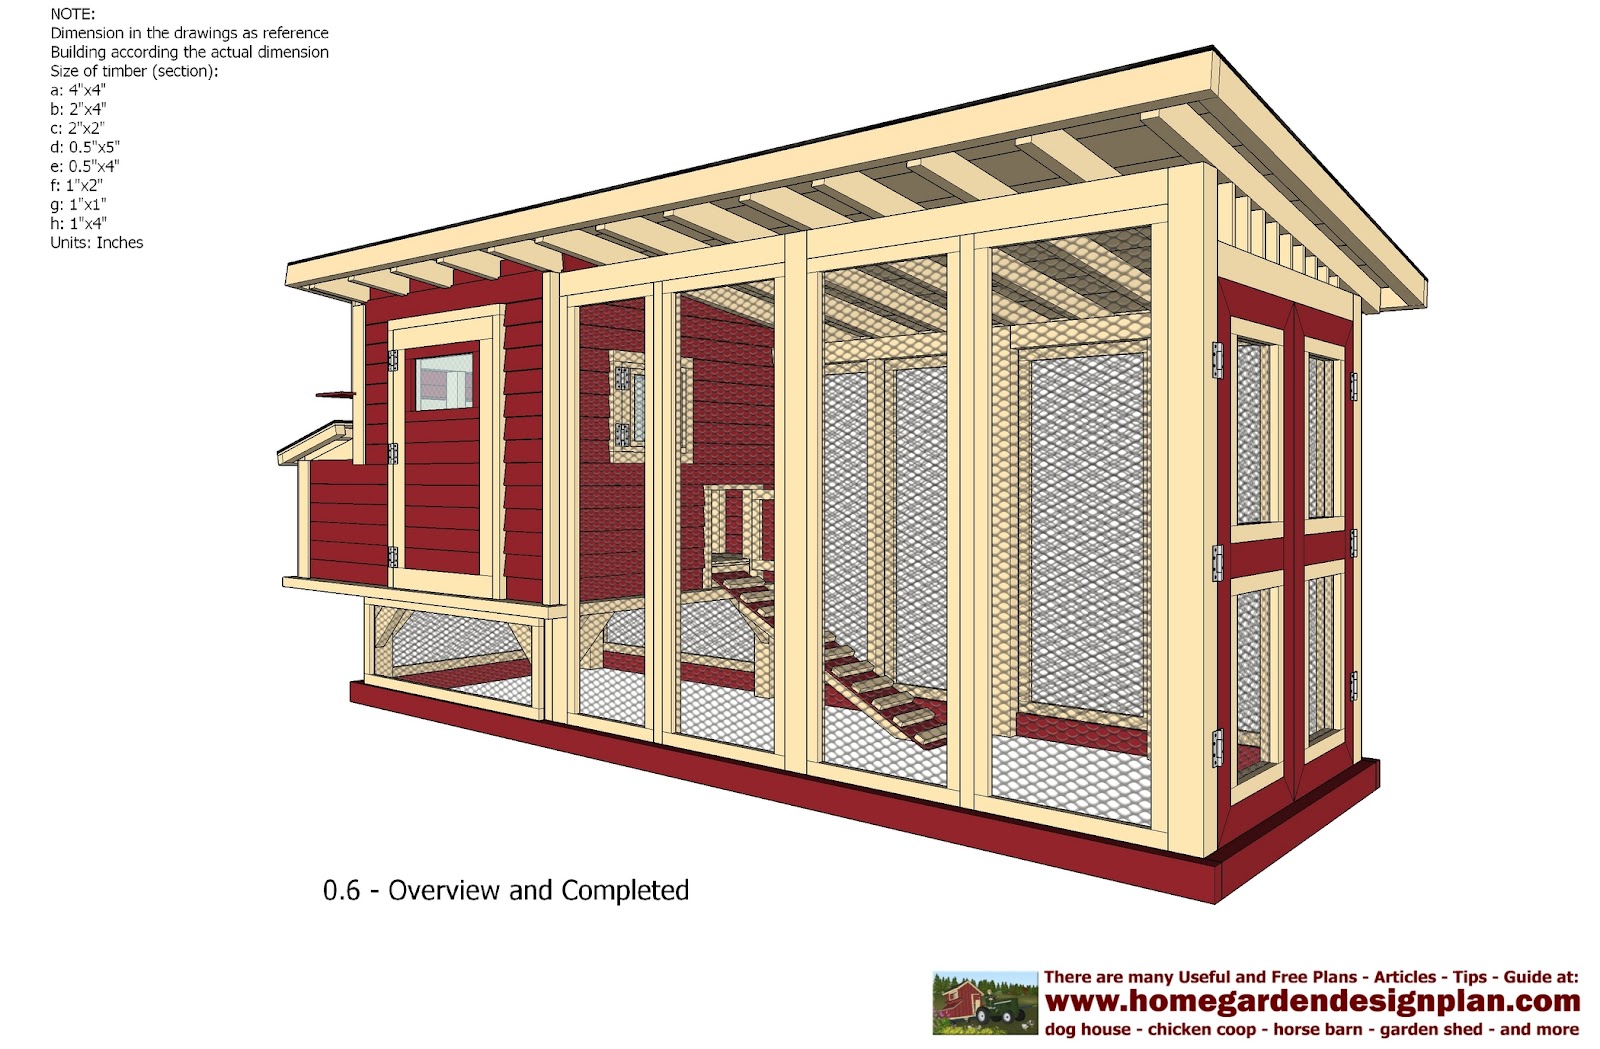 Free Printable Chicken Coop Plans | www.imgkid.com - The ...